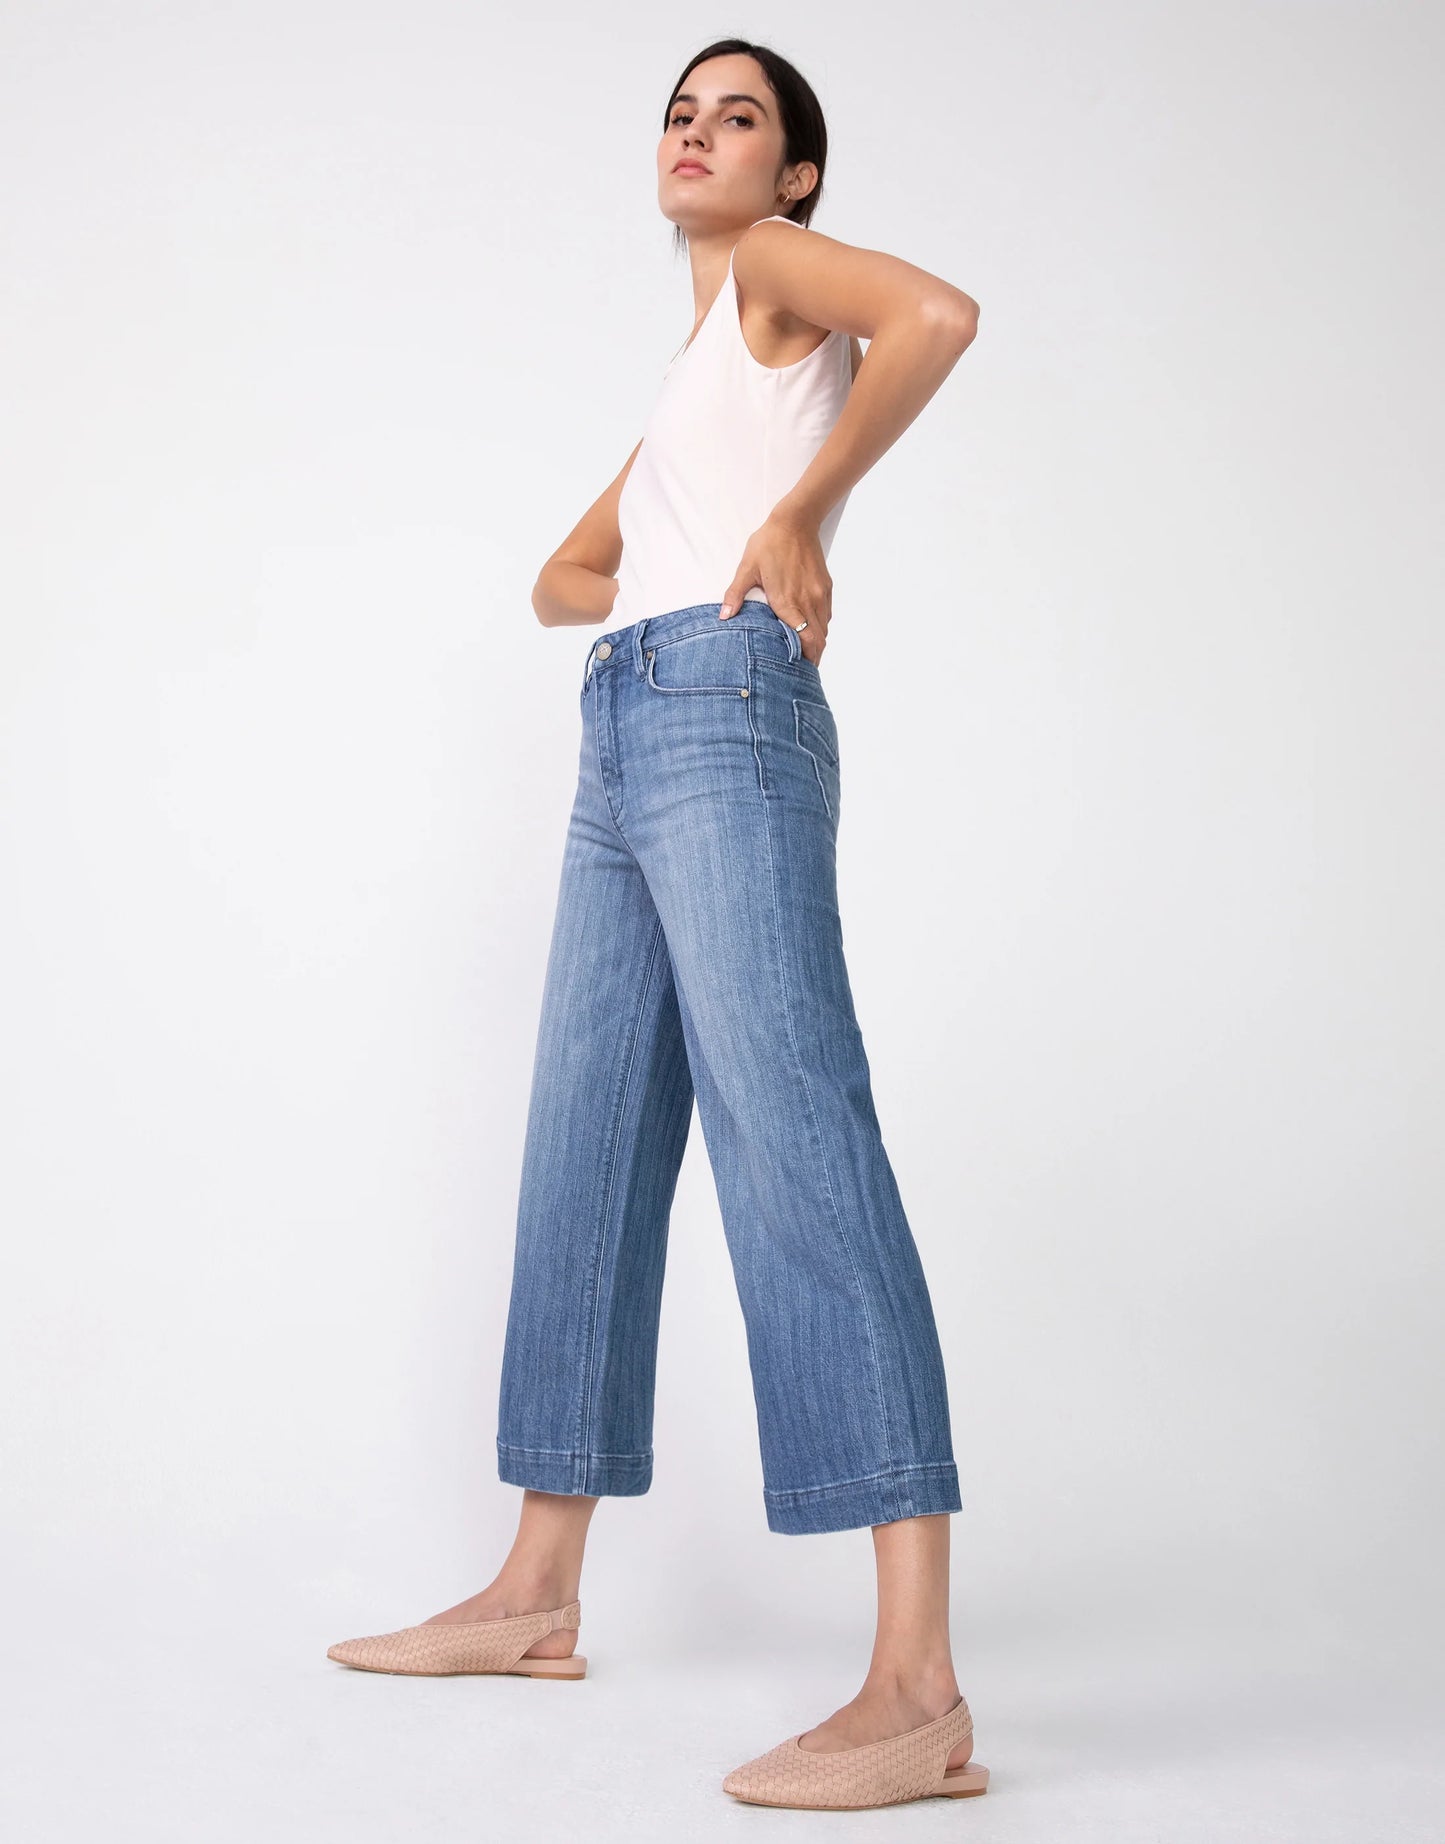 GRETA High Waist Culotte in Chevy by UnPublished